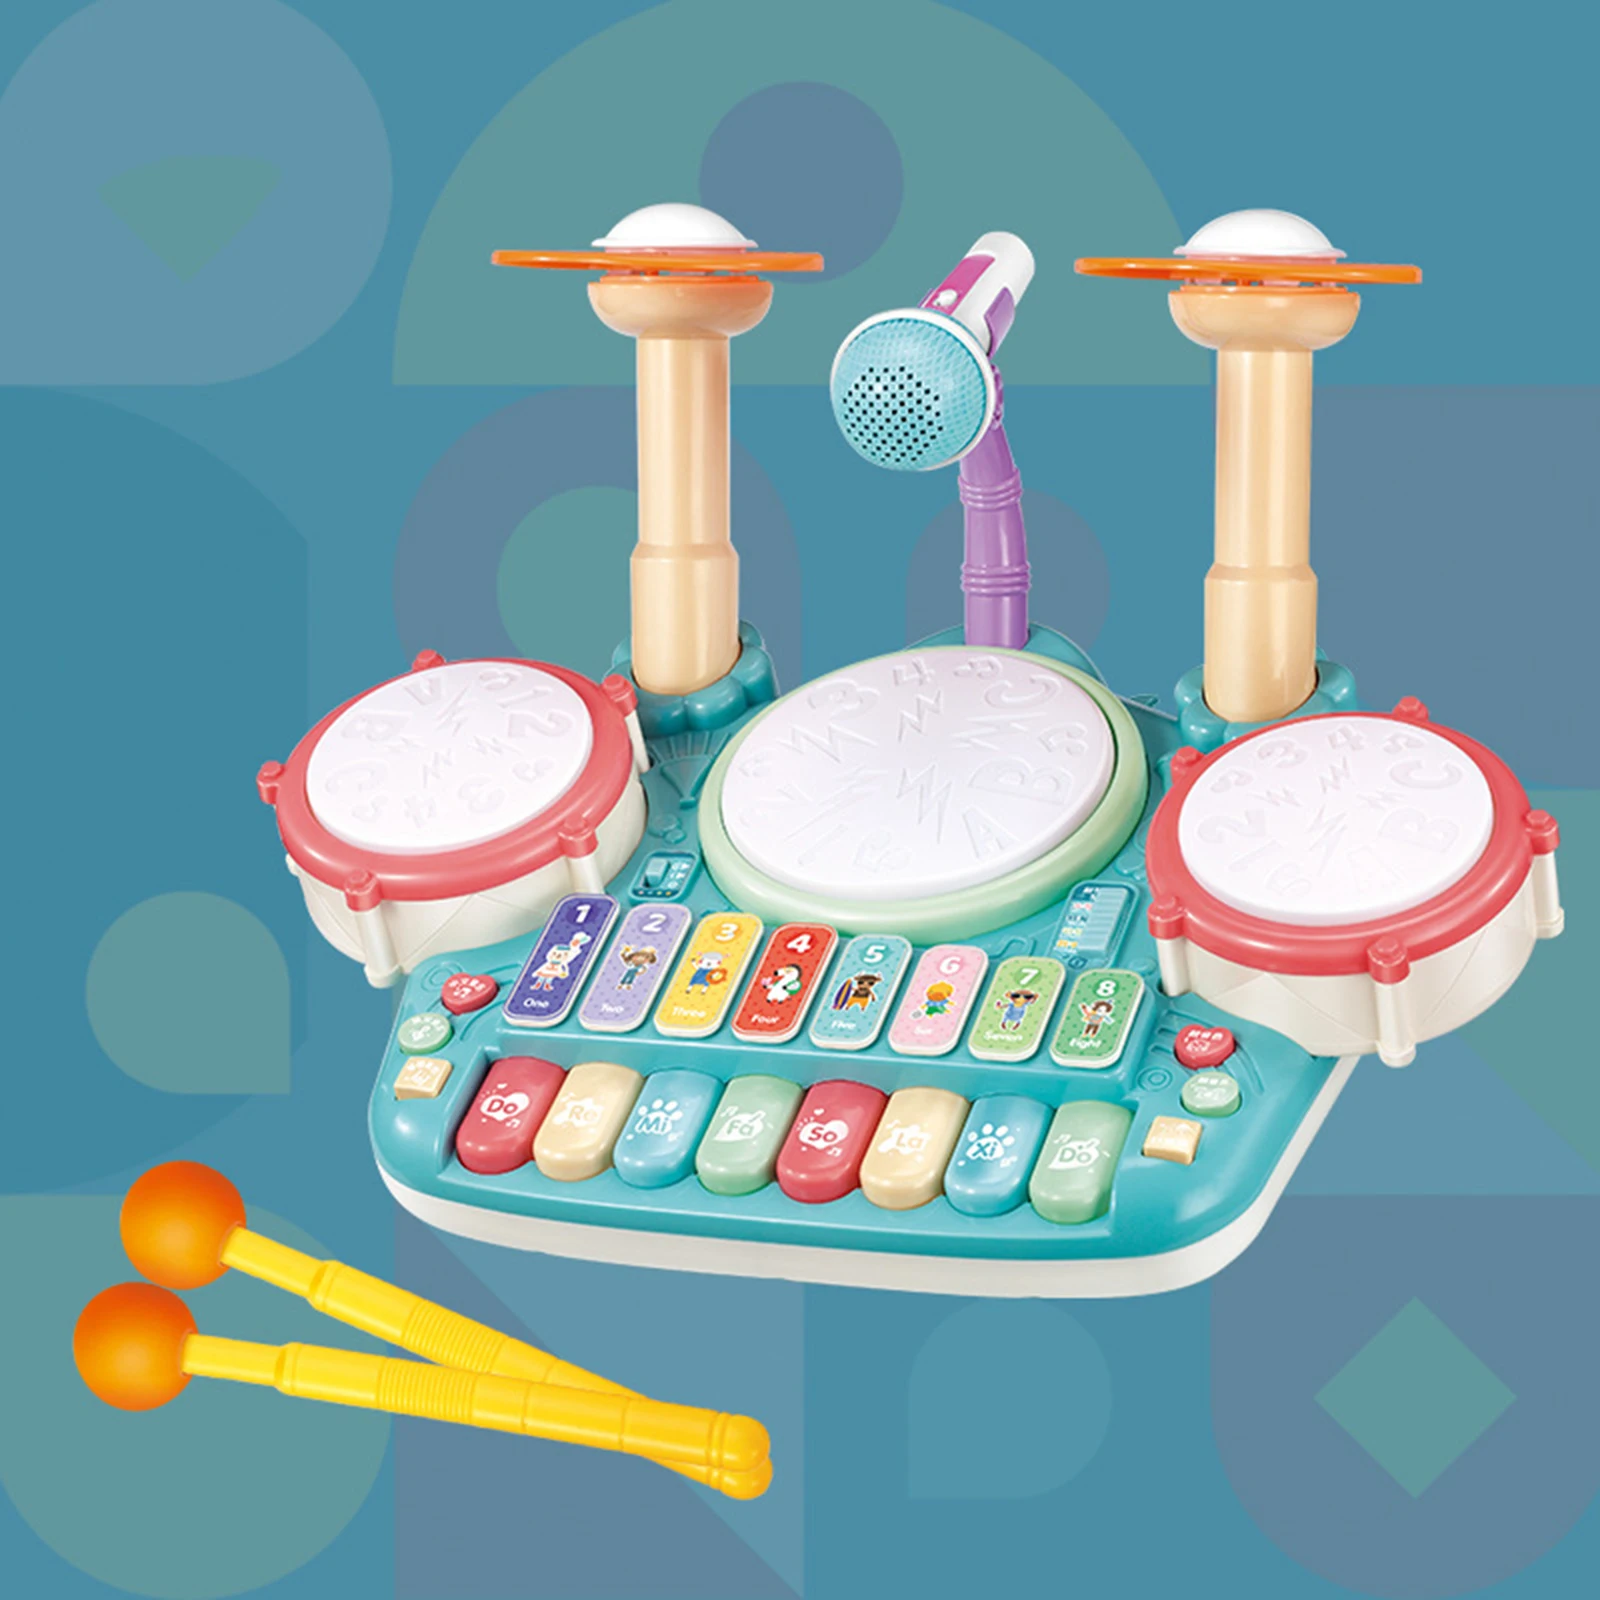 ABS Kids Drum Toy Early Education with Microphone Training Gifts Toys Educational Multi-Function Jazz Drum Musical Toy for Kids